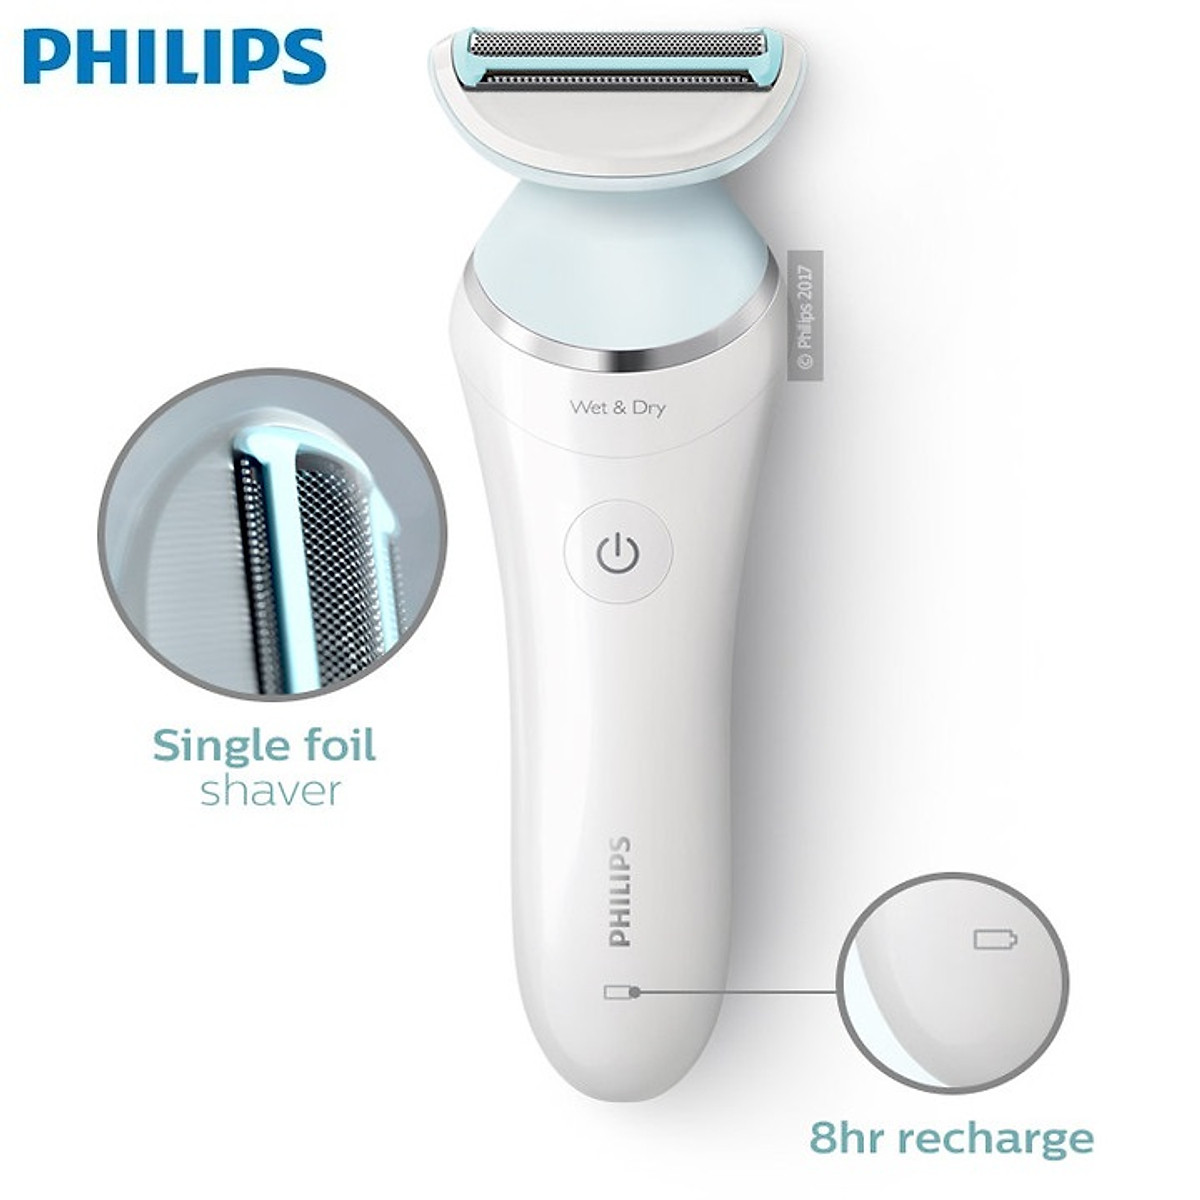 Máy cạo lông Philips Wet and Dry Electric Shaver BRL130/00